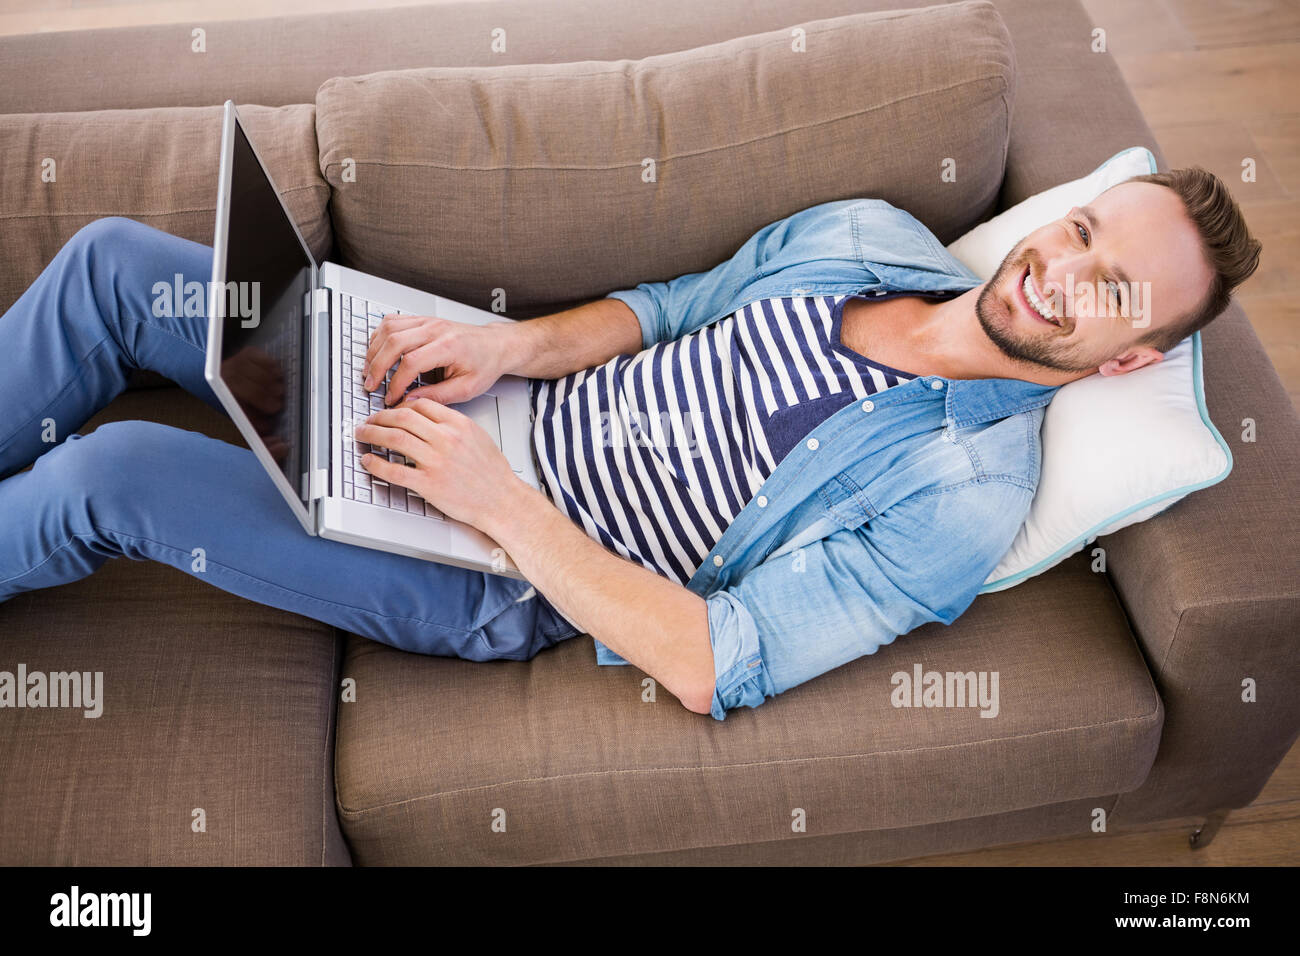 Handsome man using laptop on couch Stock Photo